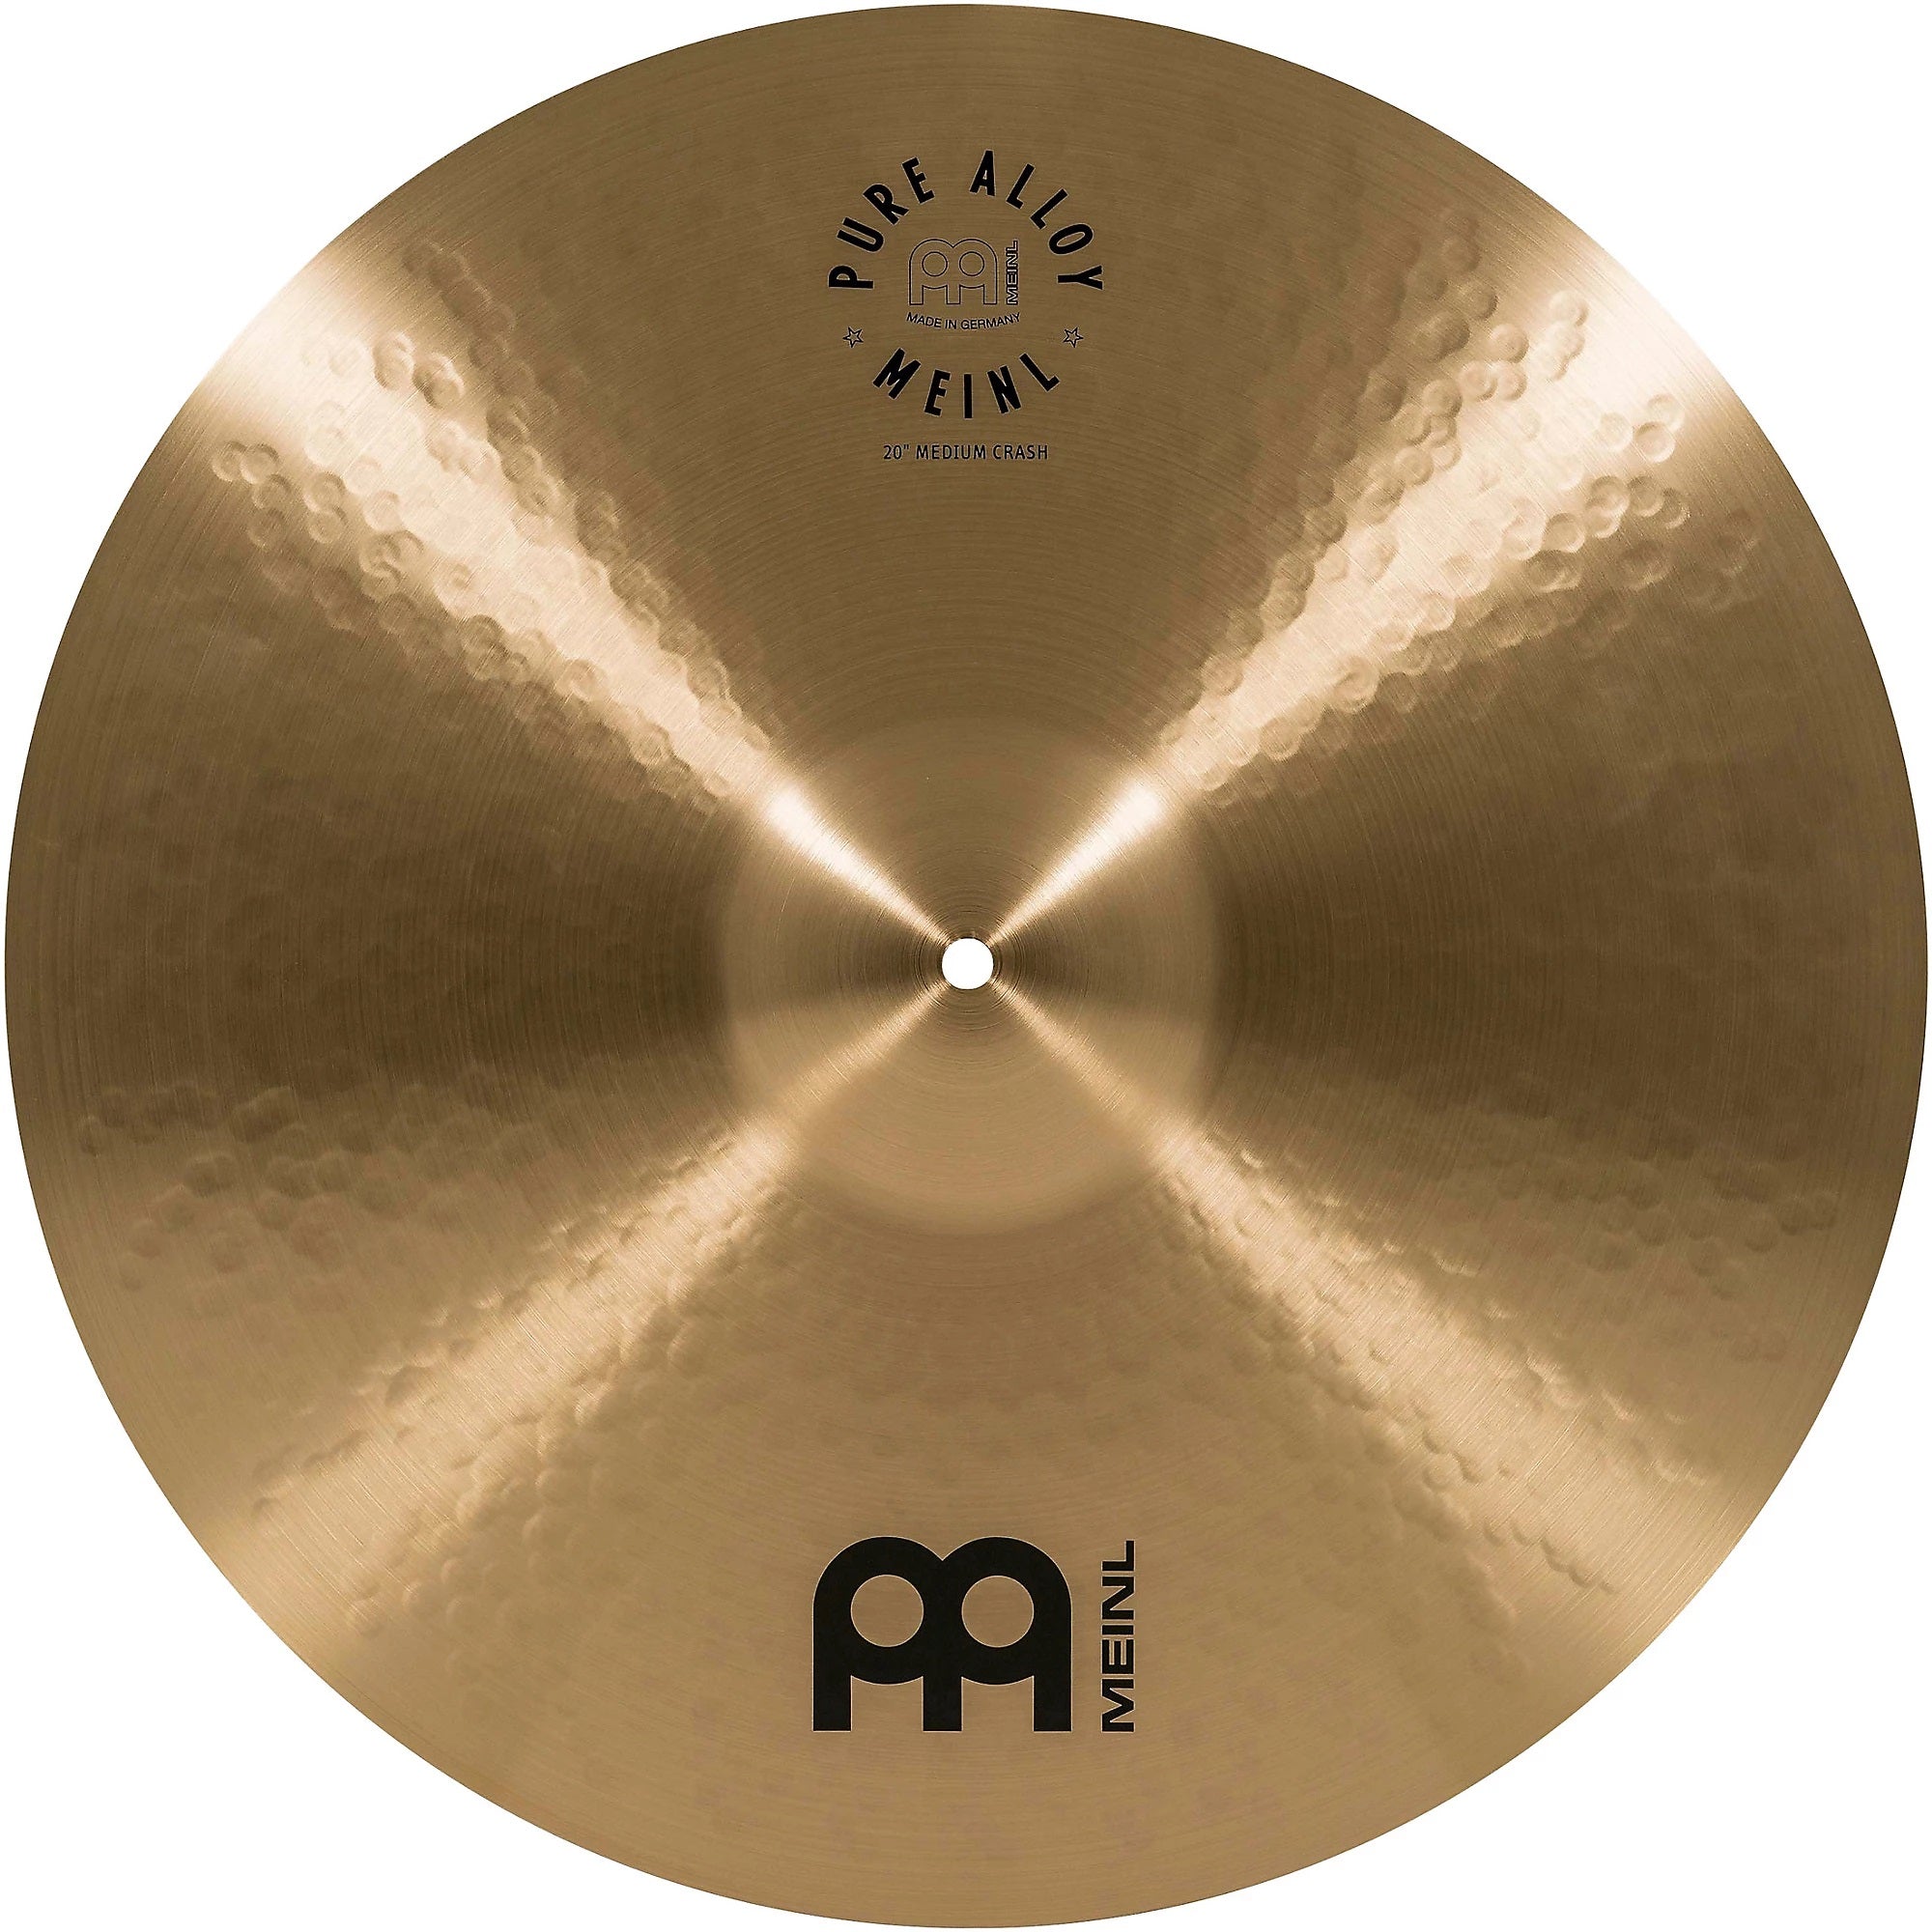 Meinl Pure Alloy Traditional Medium Crash Cymbal 20 in.